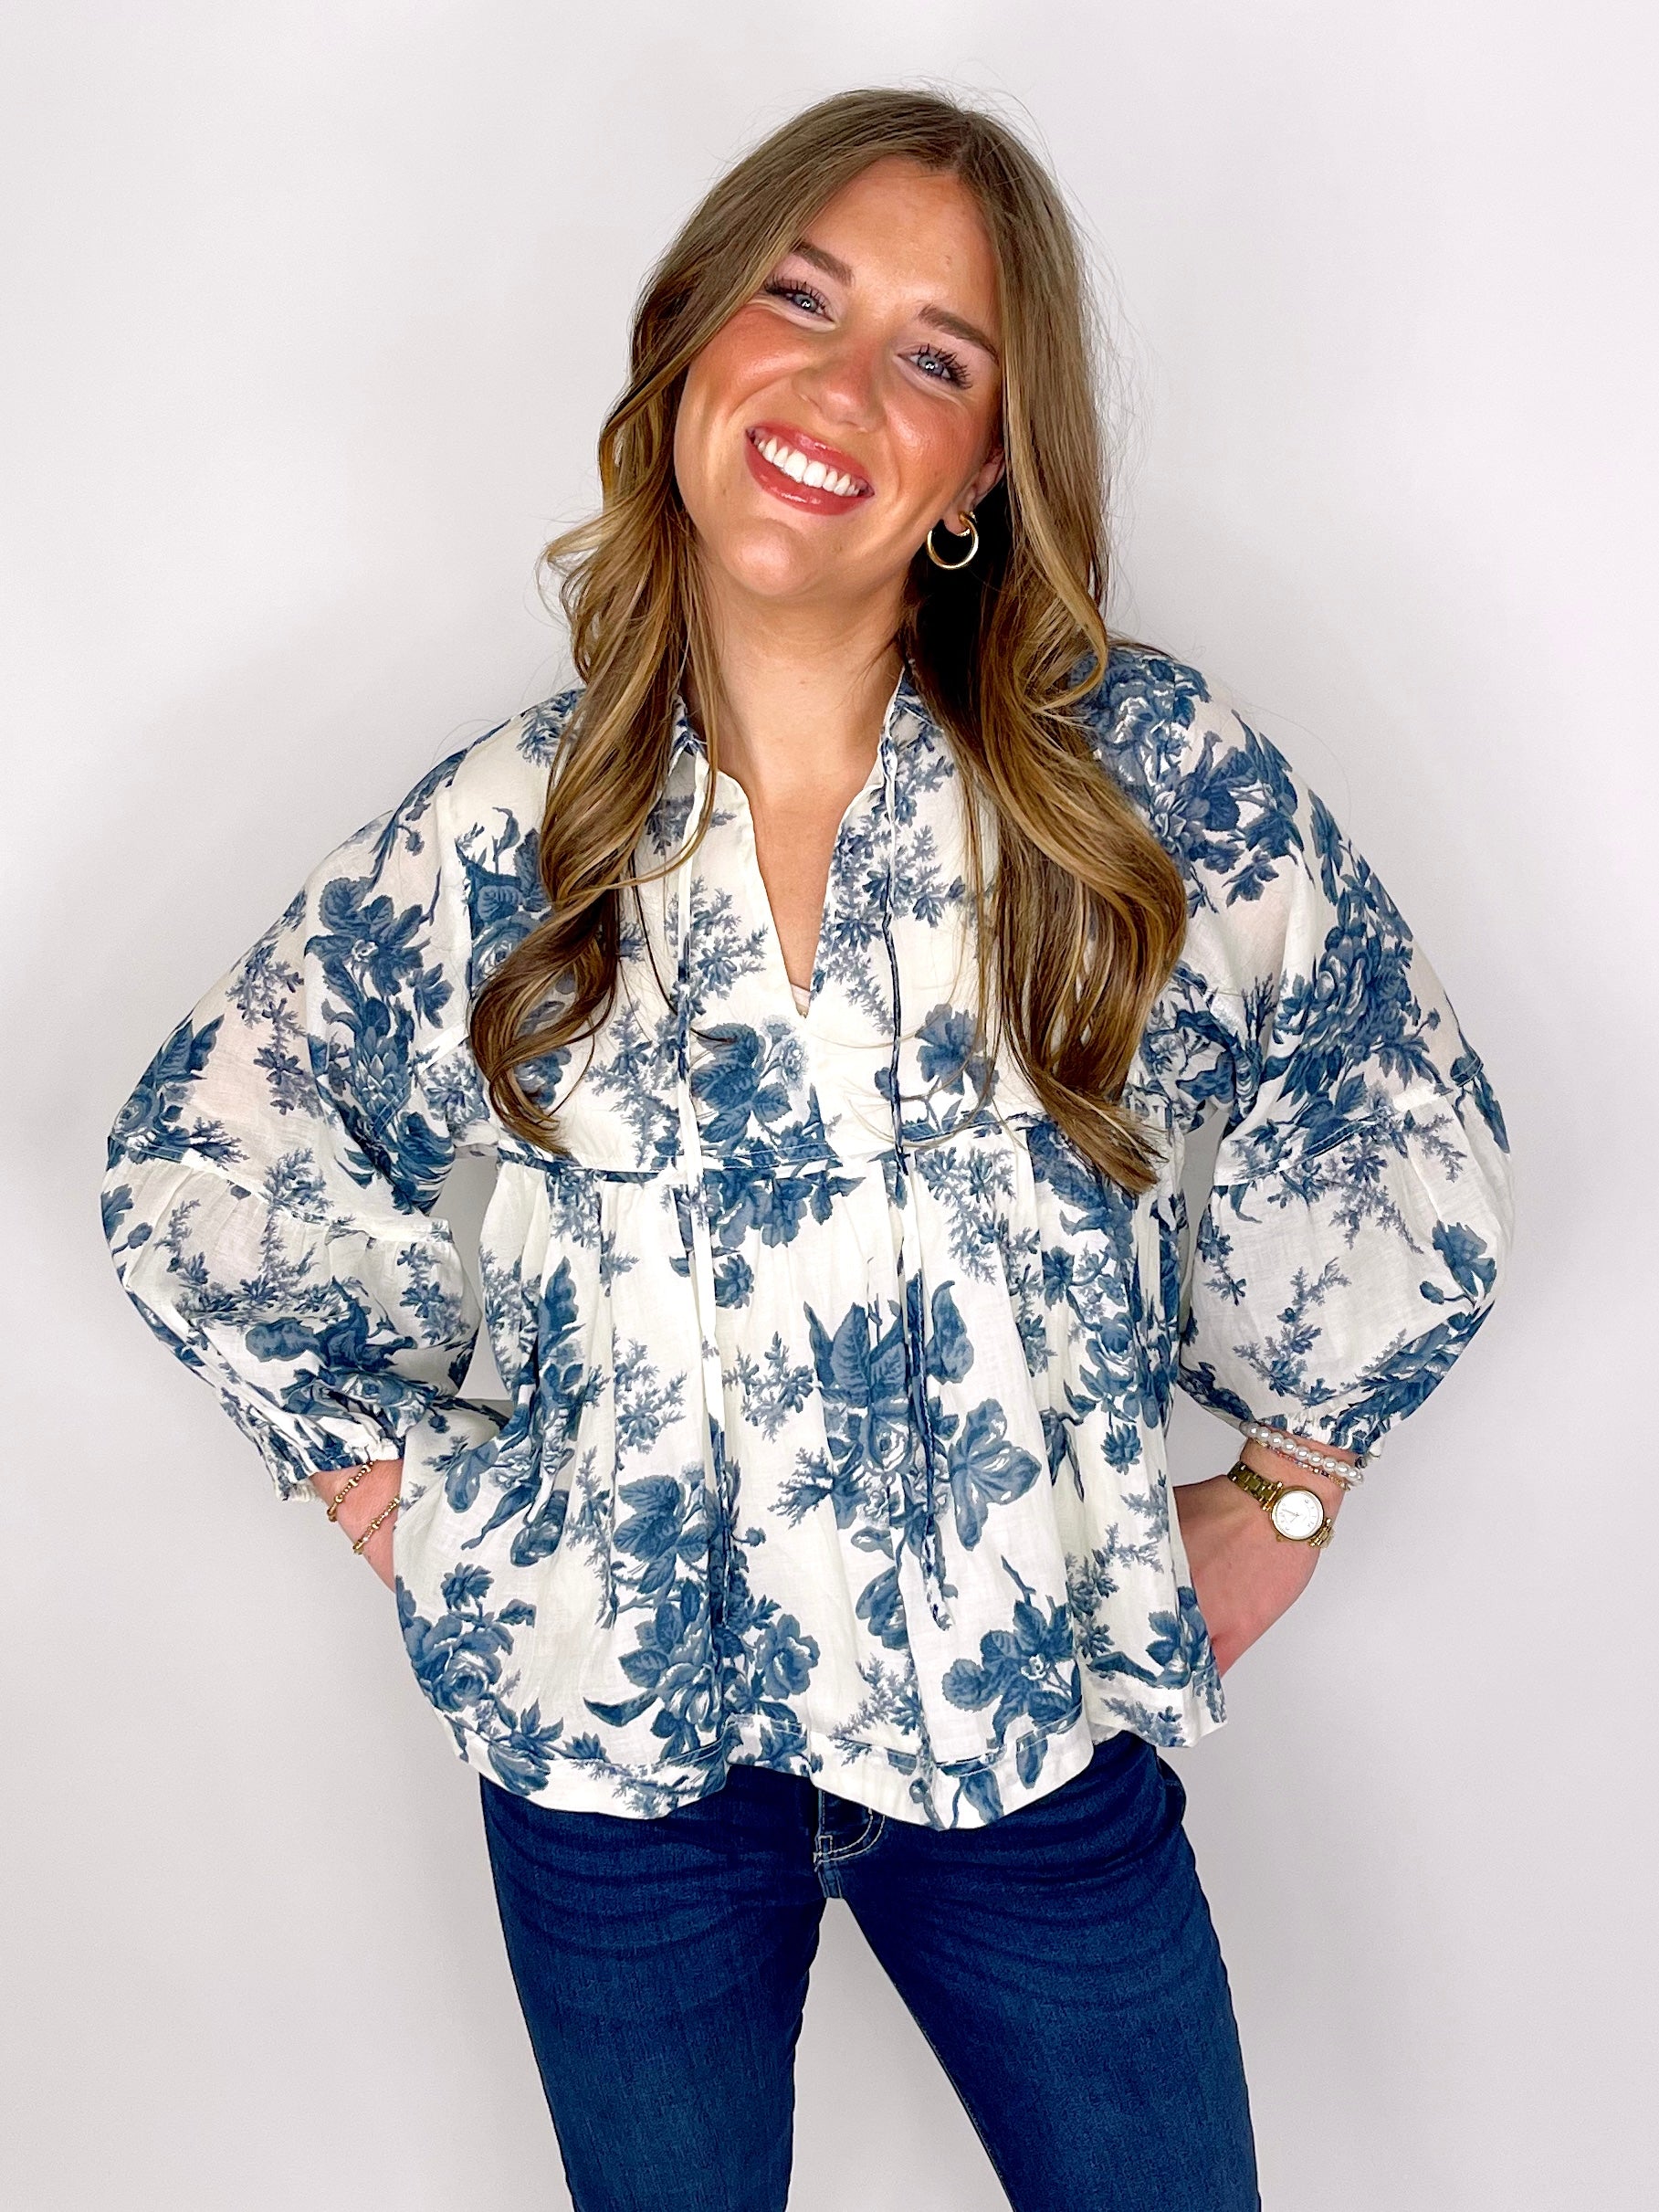 The Faith Top-Blouse-&merci-The Village Shoppe, Women’s Fashion Boutique, Shop Online and In Store - Located in Muscle Shoals, AL.